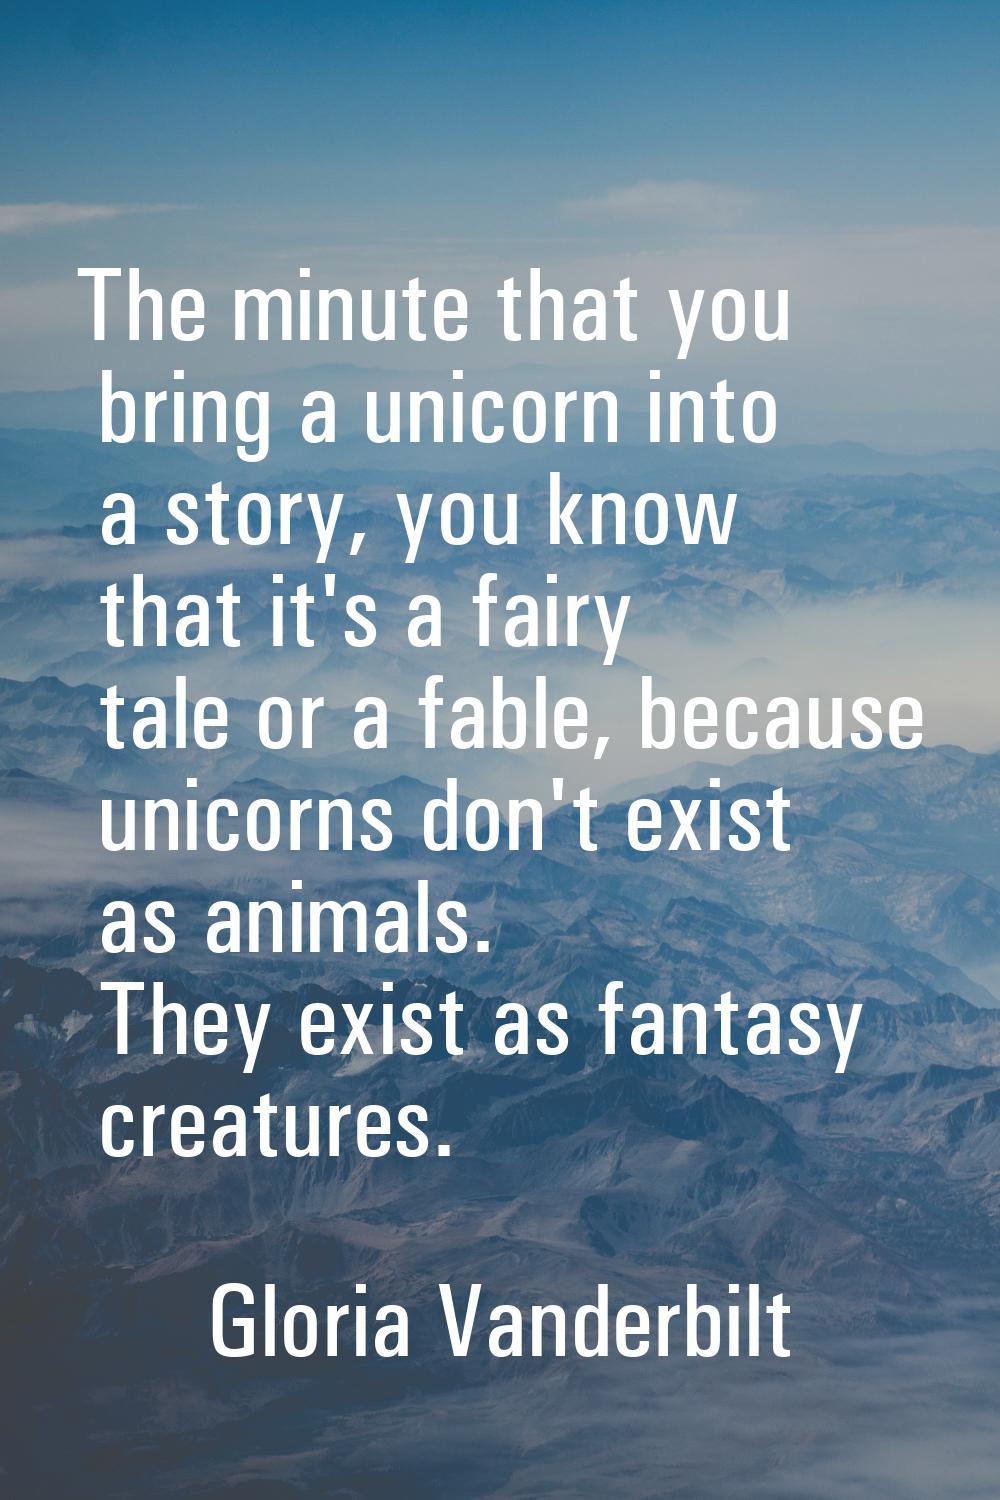 The minute that you bring a unicorn into a story, you know that it's a fairy tale or a fable, becau